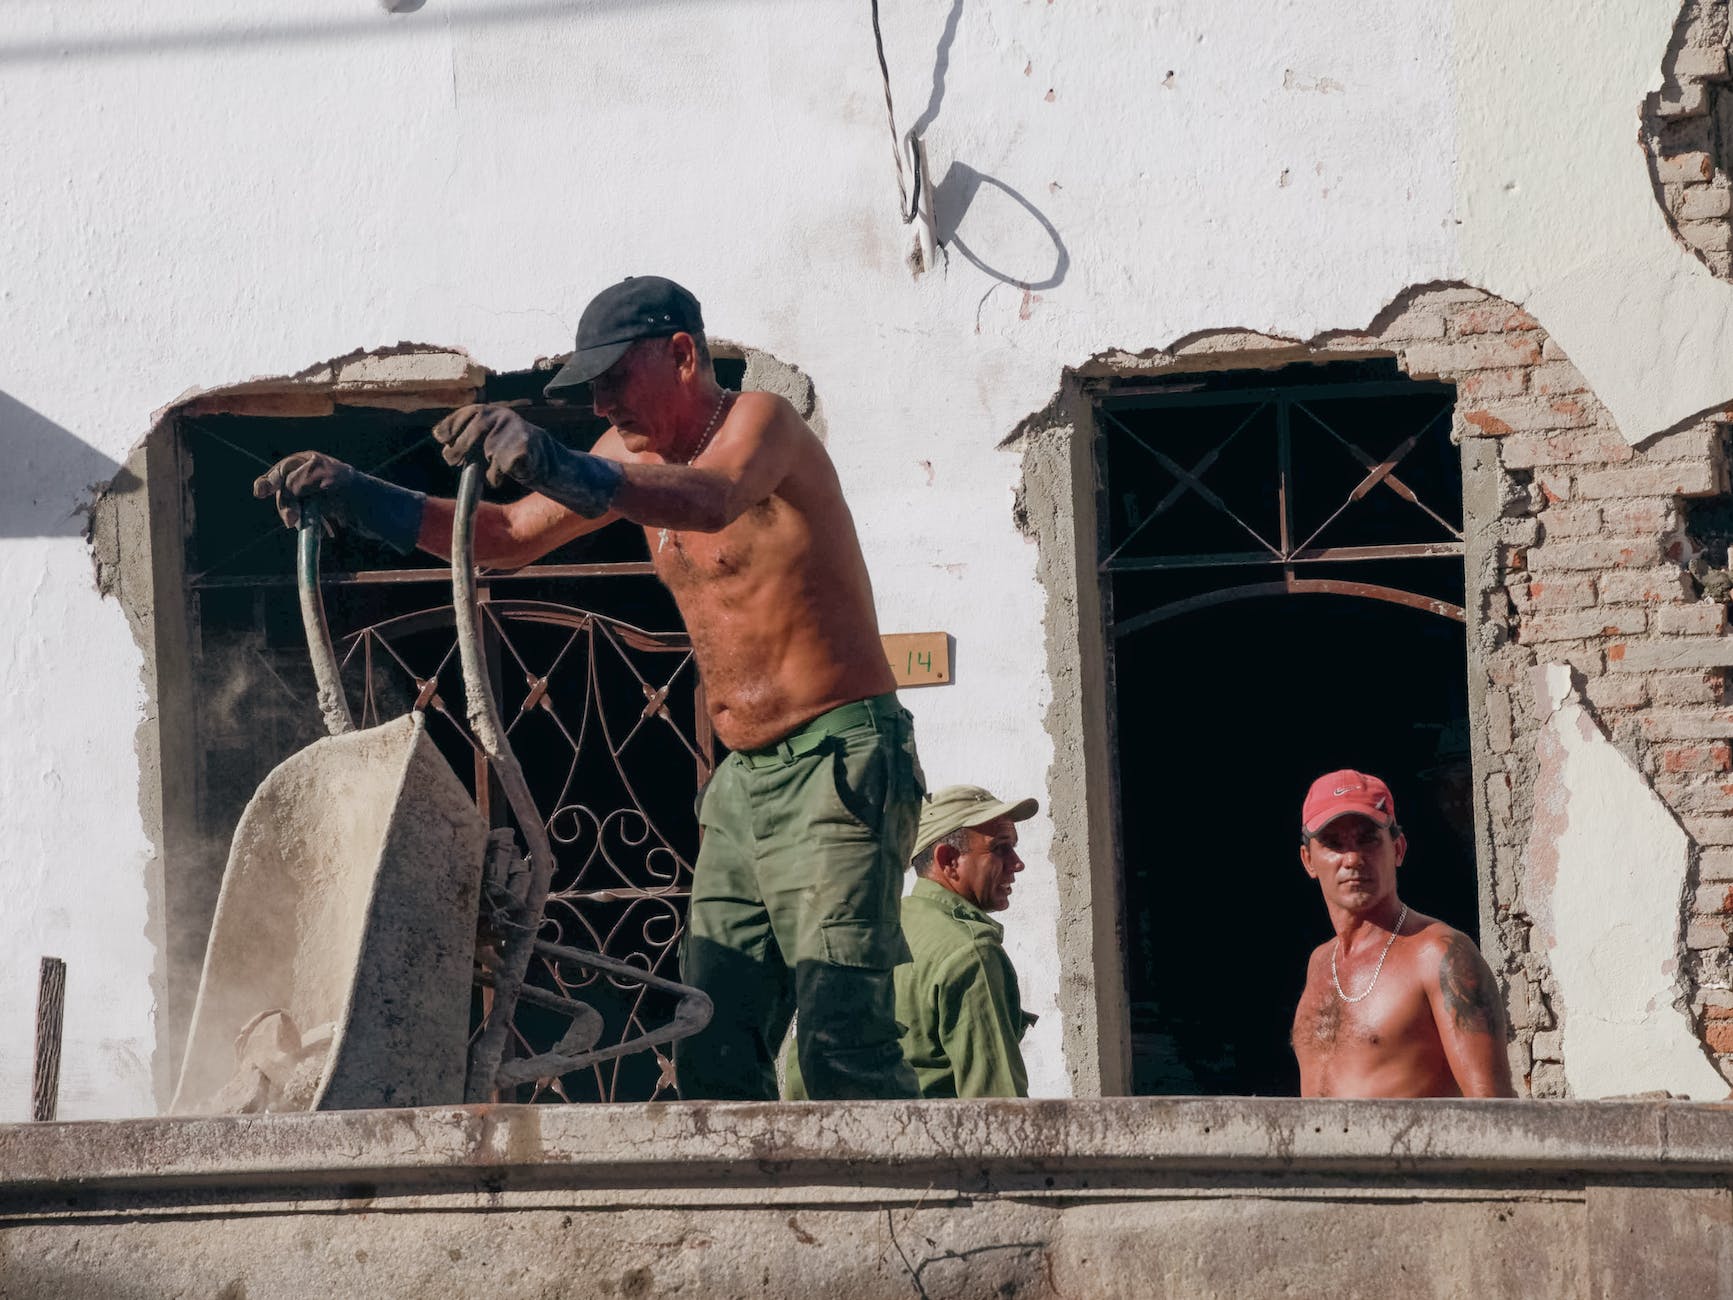 shirtless men working on balcony of old building